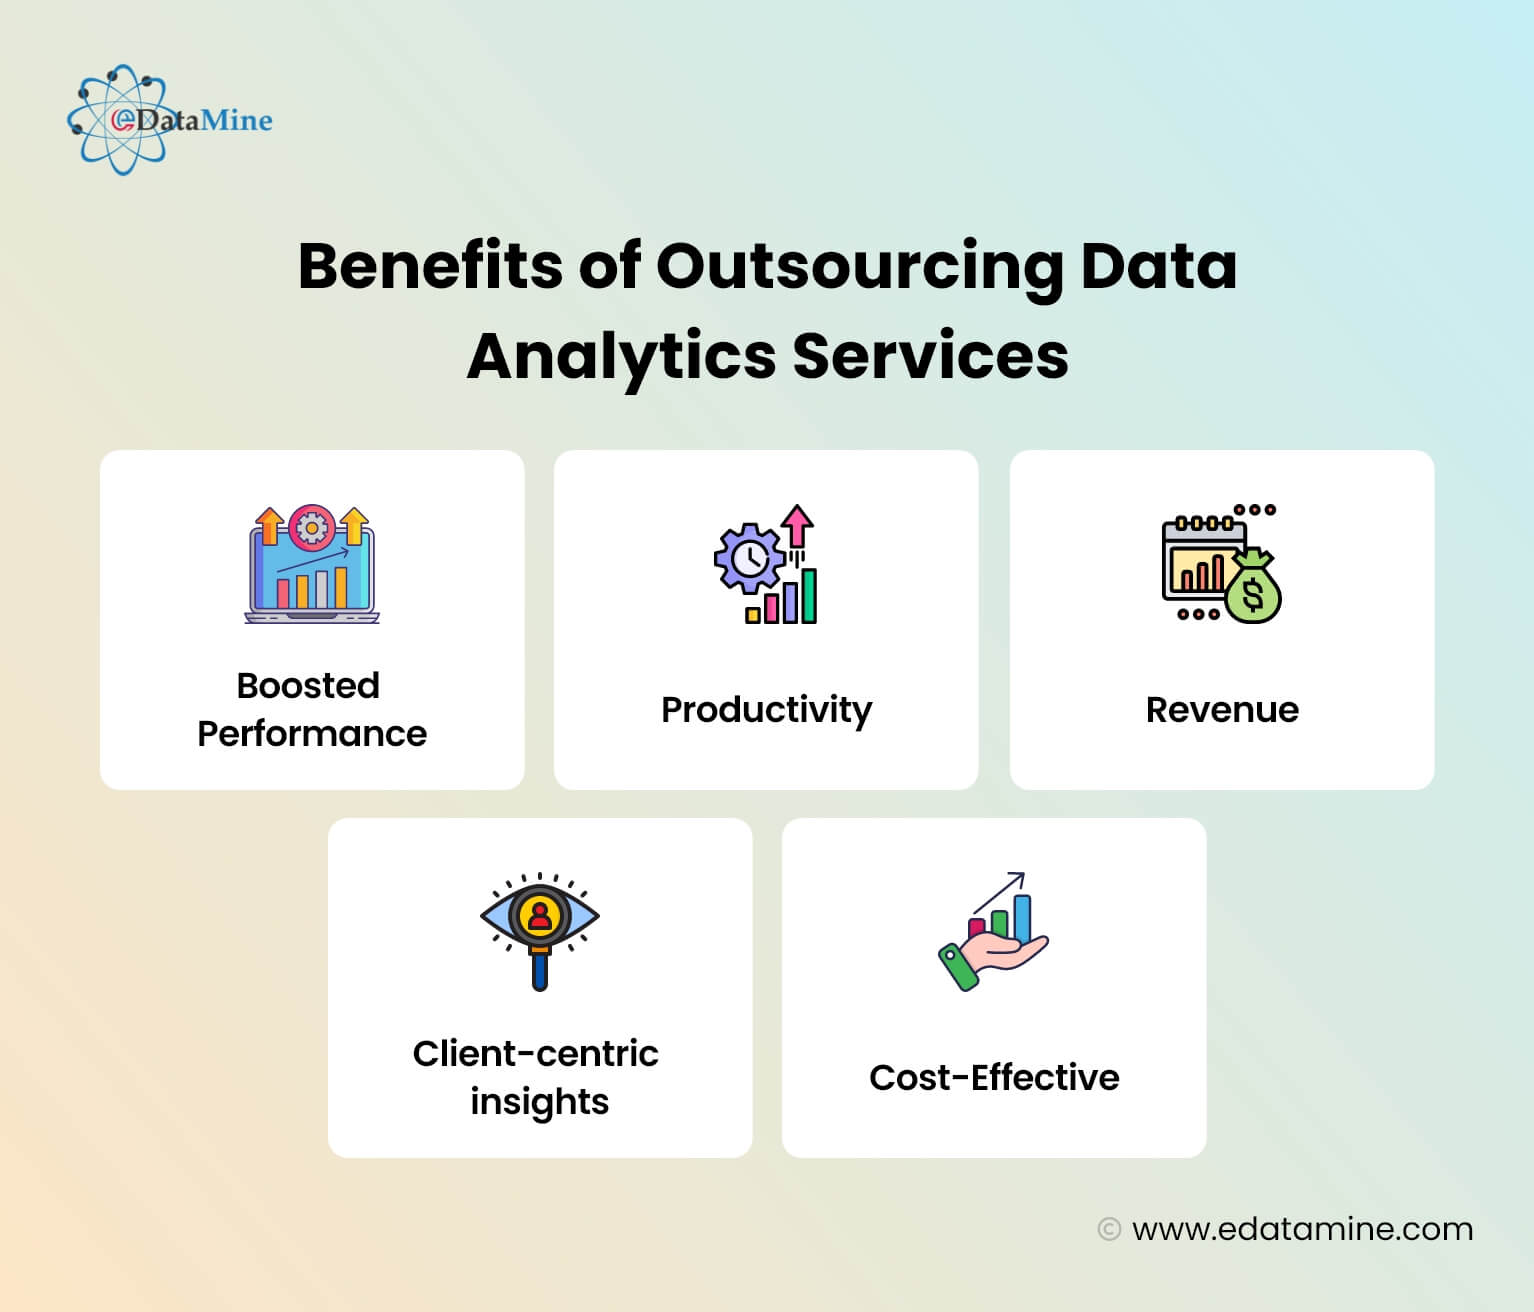 Benefits of Outsourcing Data Analytics Services